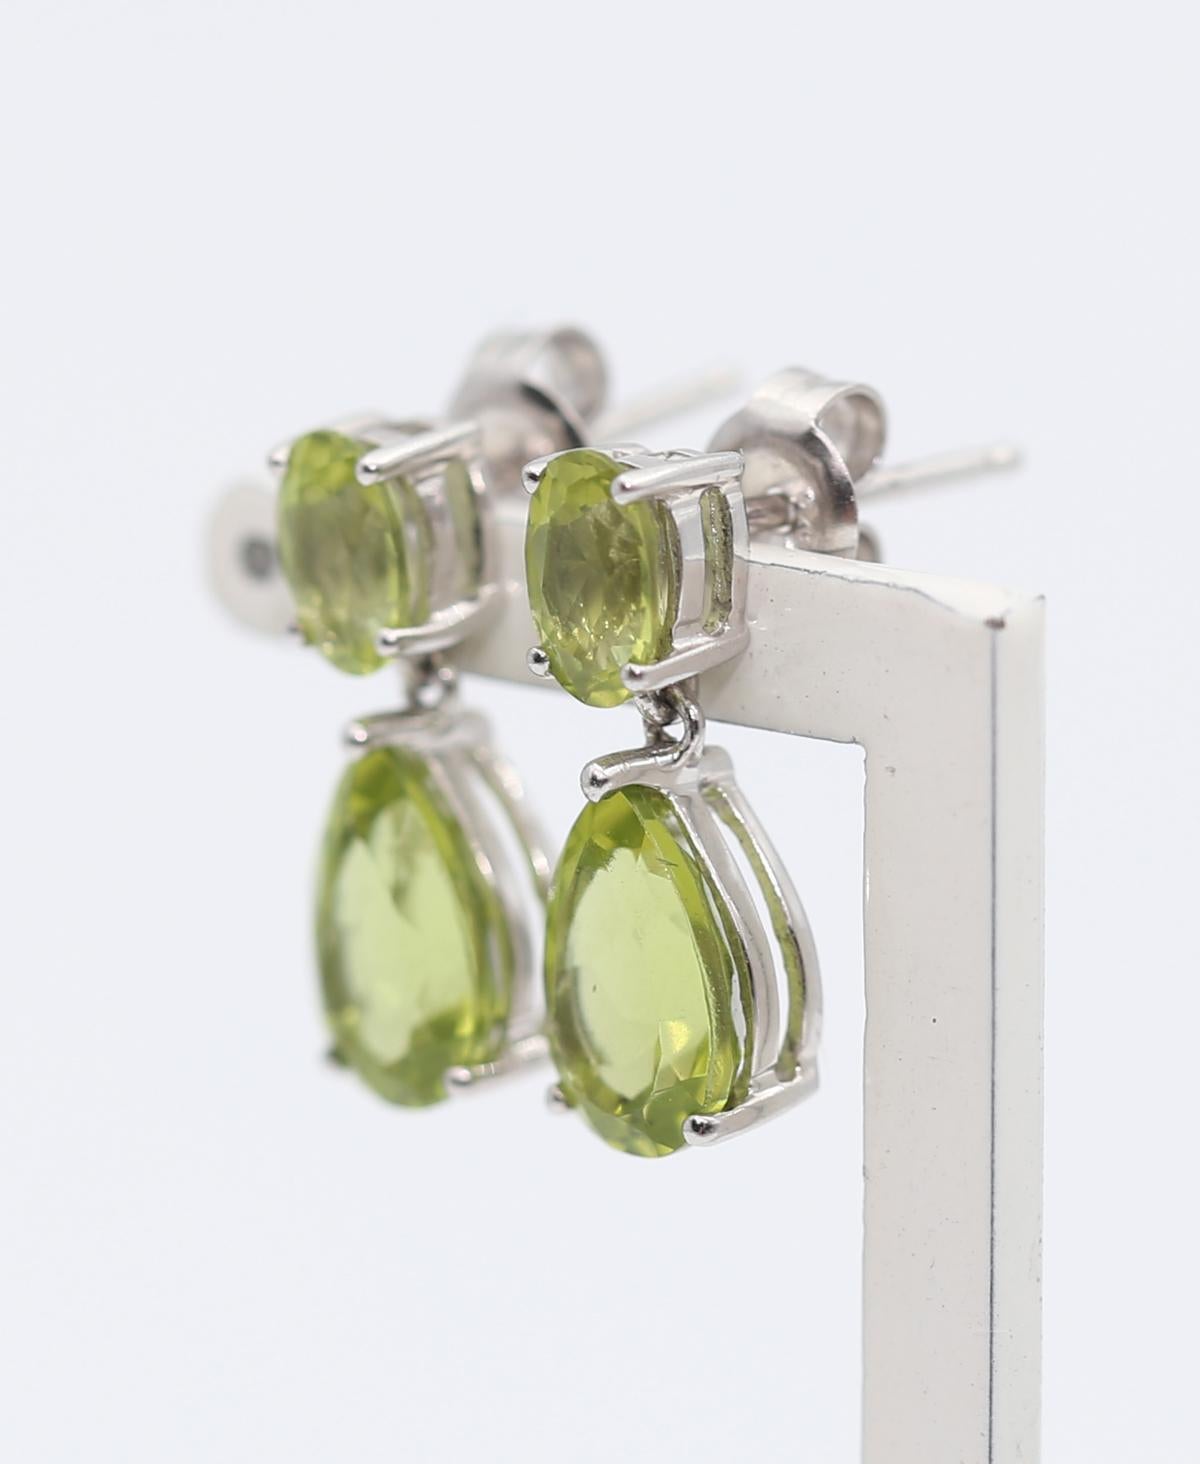 A beautiful pair of 5.50 Carat Peridot drop shapes. Suspended from two oval and pear-shaped Peridot set in White Gold. Vibrant color and relatively massive stones demand attention whenever and wherever it’s worn. The bottom stone is not rigidly